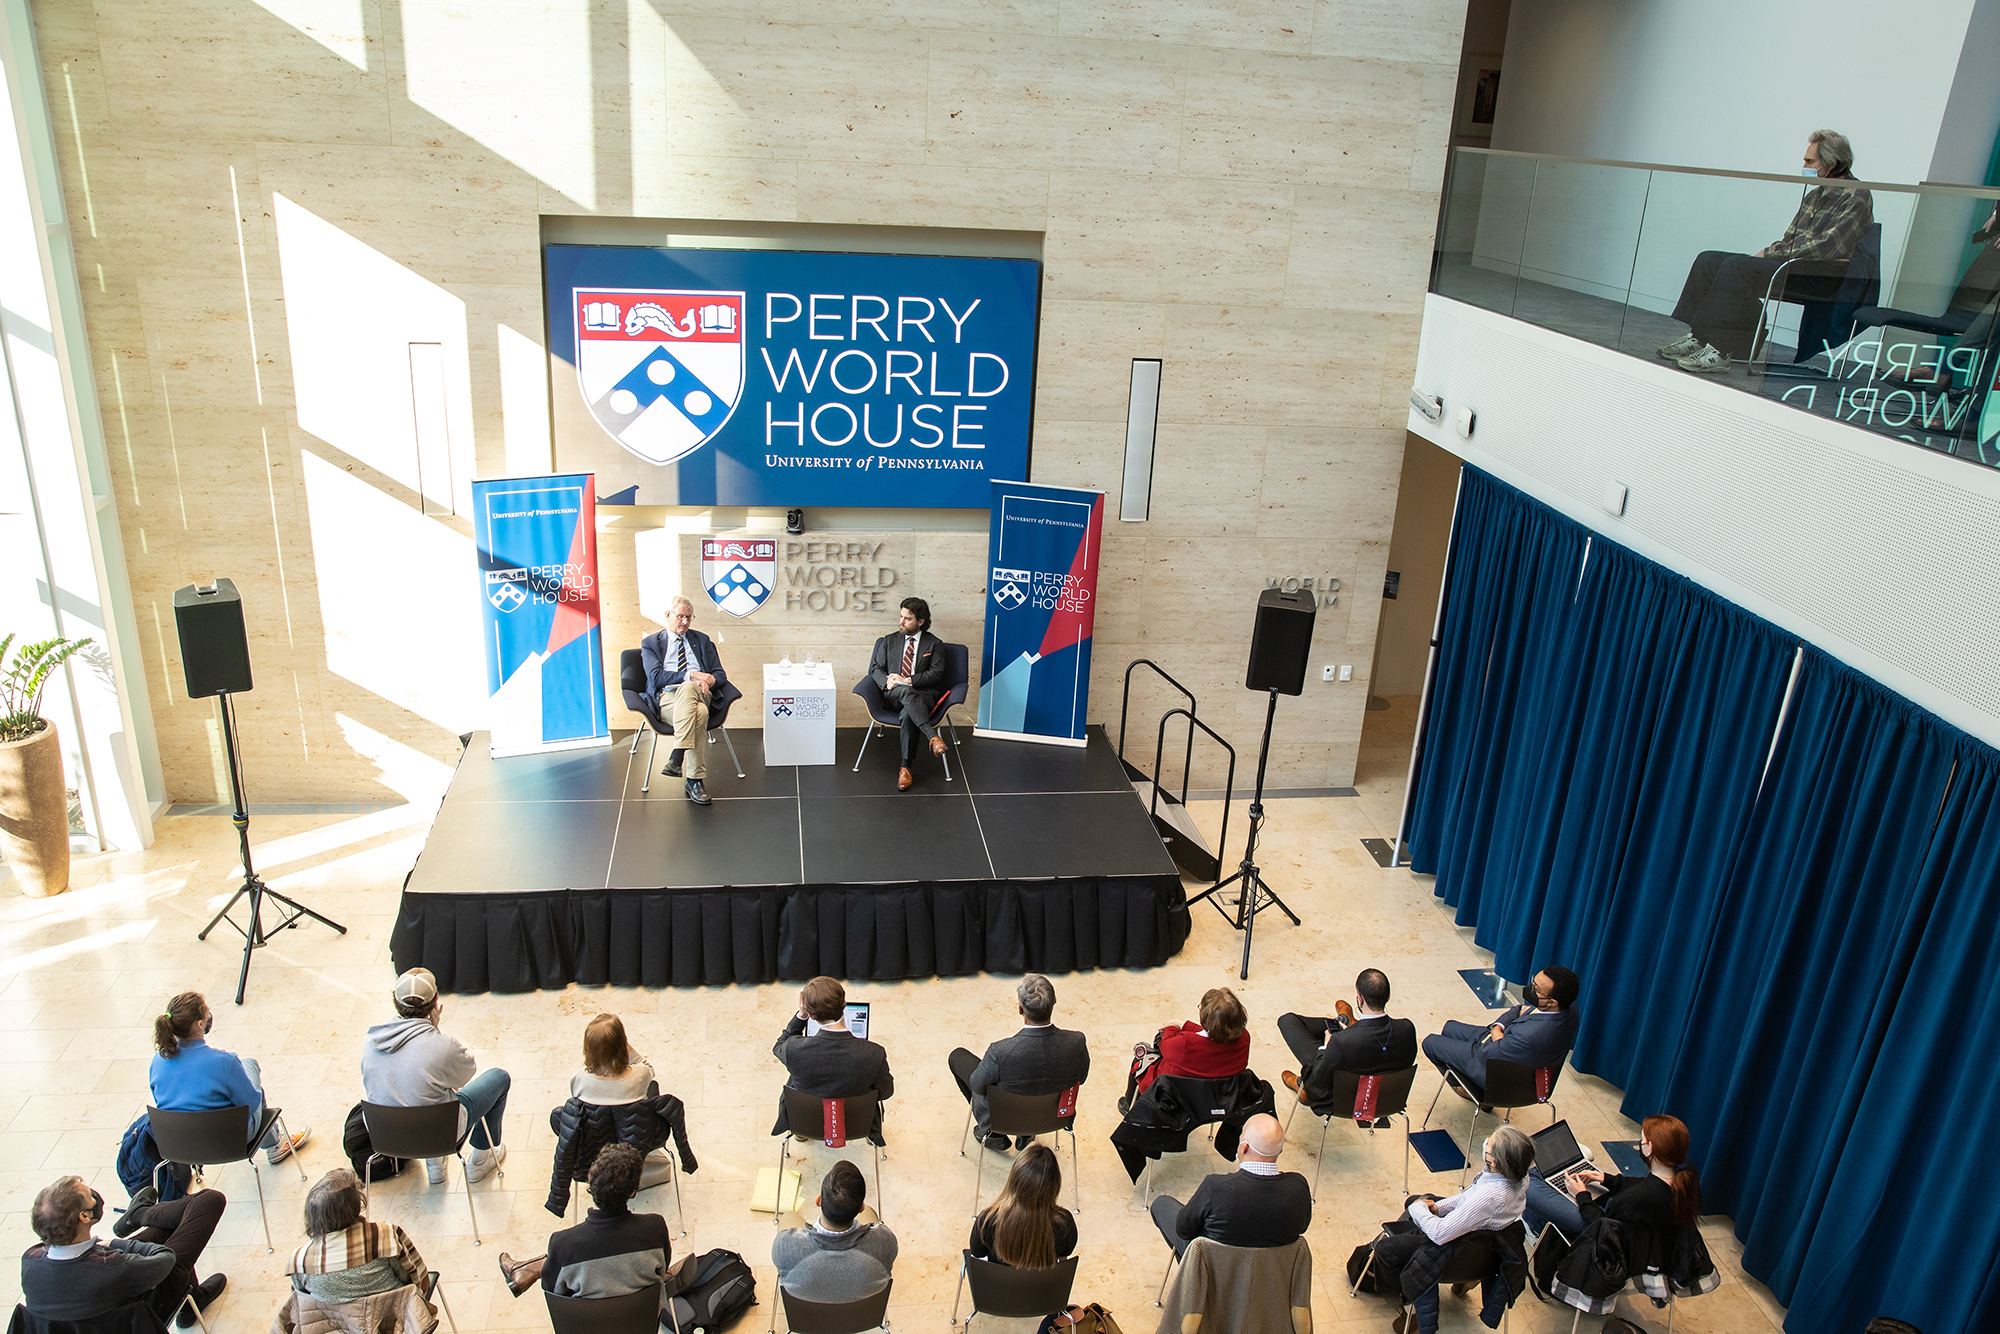 Carl Bildt and Clay Risen are seen on a stage speaking in front of a group of seated people at Perry World House